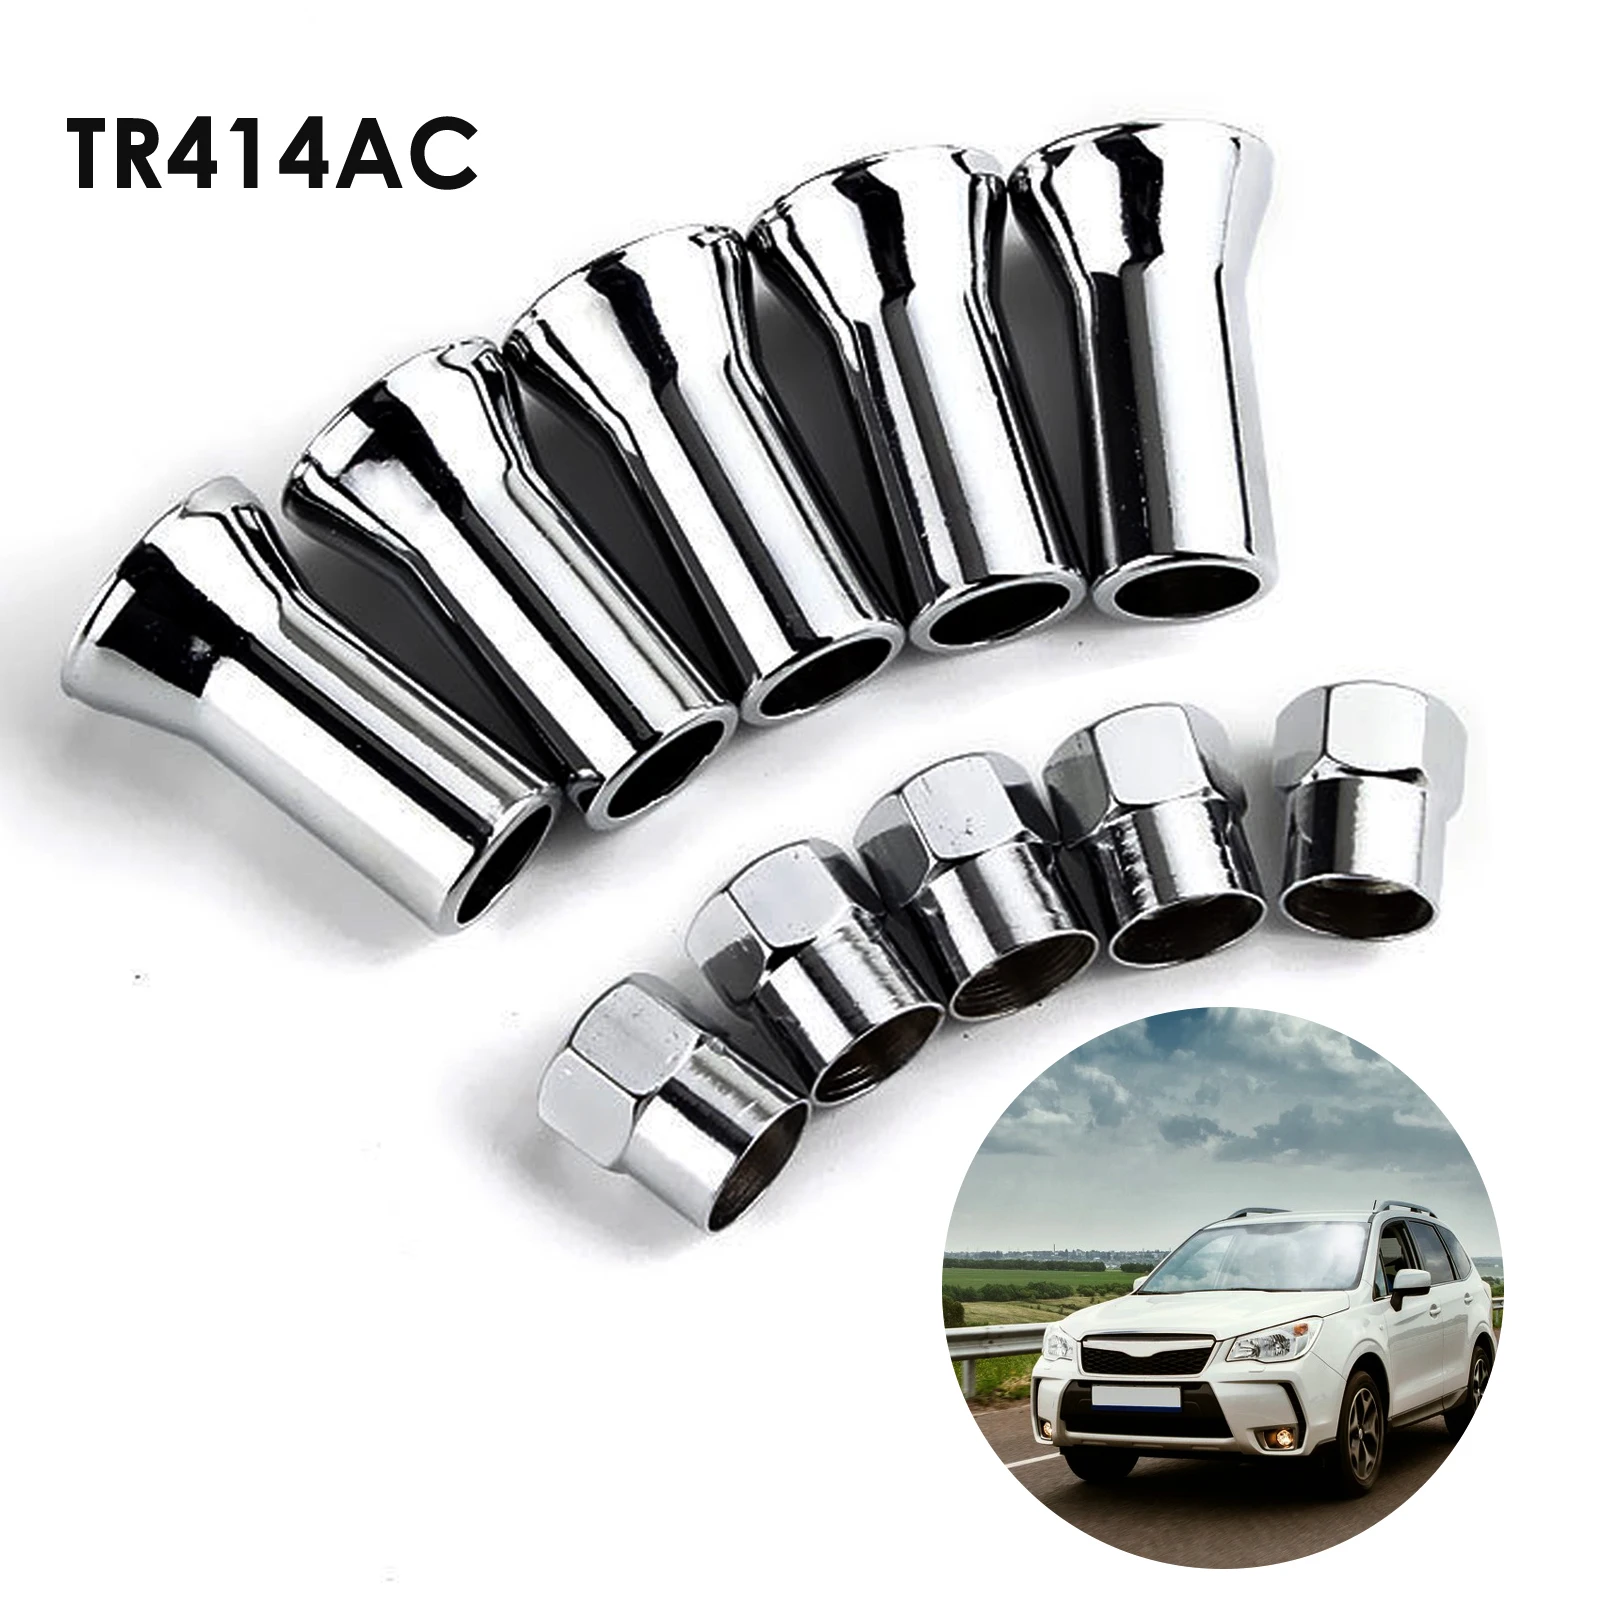 10Pcs TR414AC Chrome Car Truck Tire Wheel Tyre Valve Stem Hex Caps with Sleeve Covers Left Right Front Rear Auto Accessories